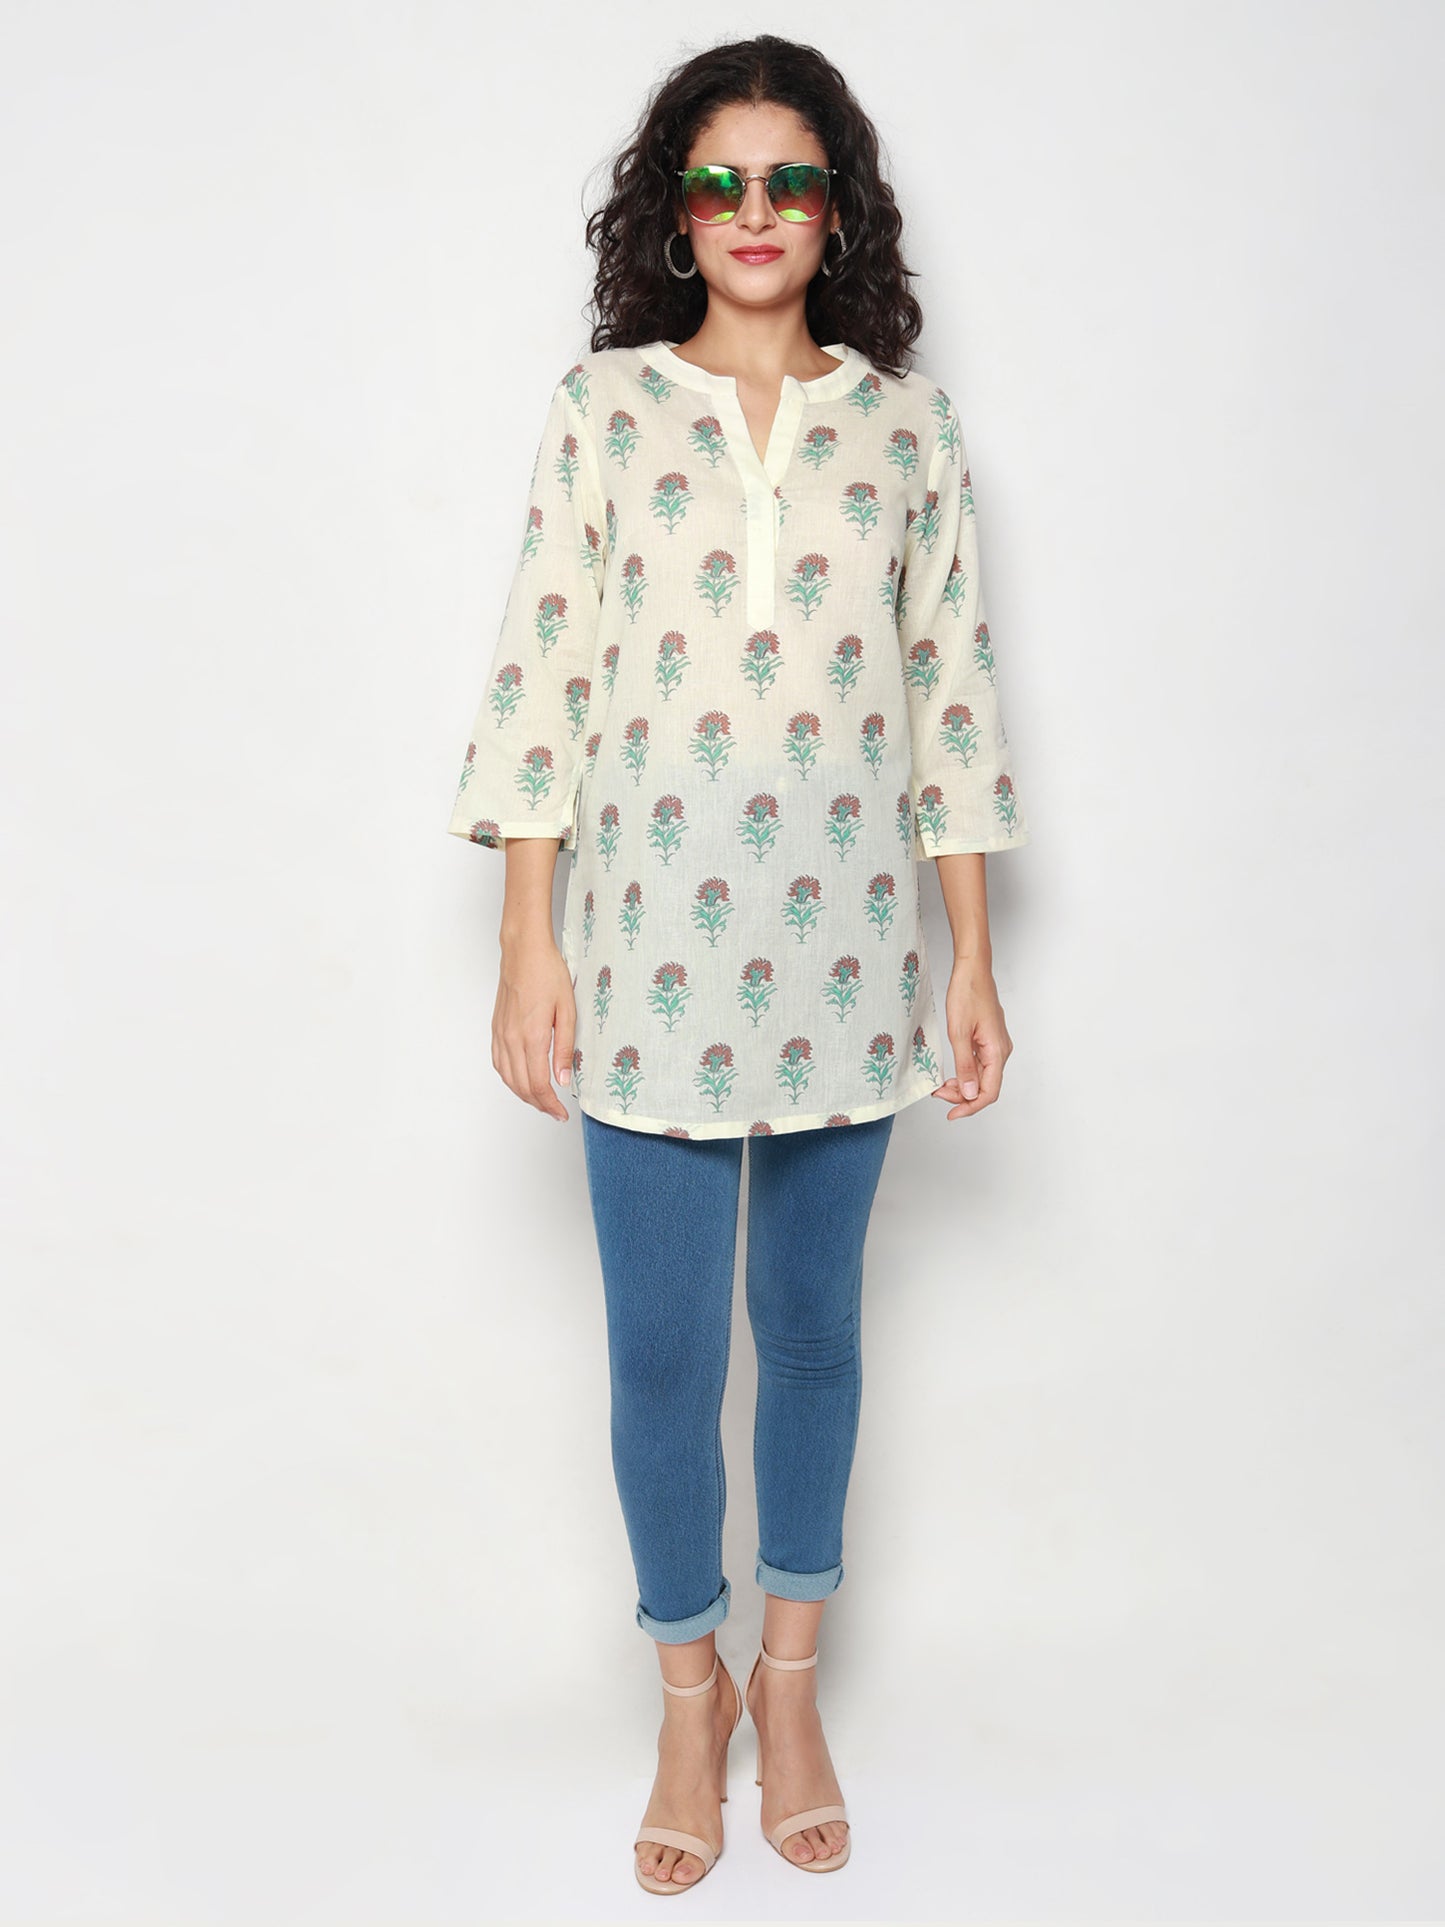 
                  
                    Ivory Cotton Tunic with Floral Block Prints
                  
                